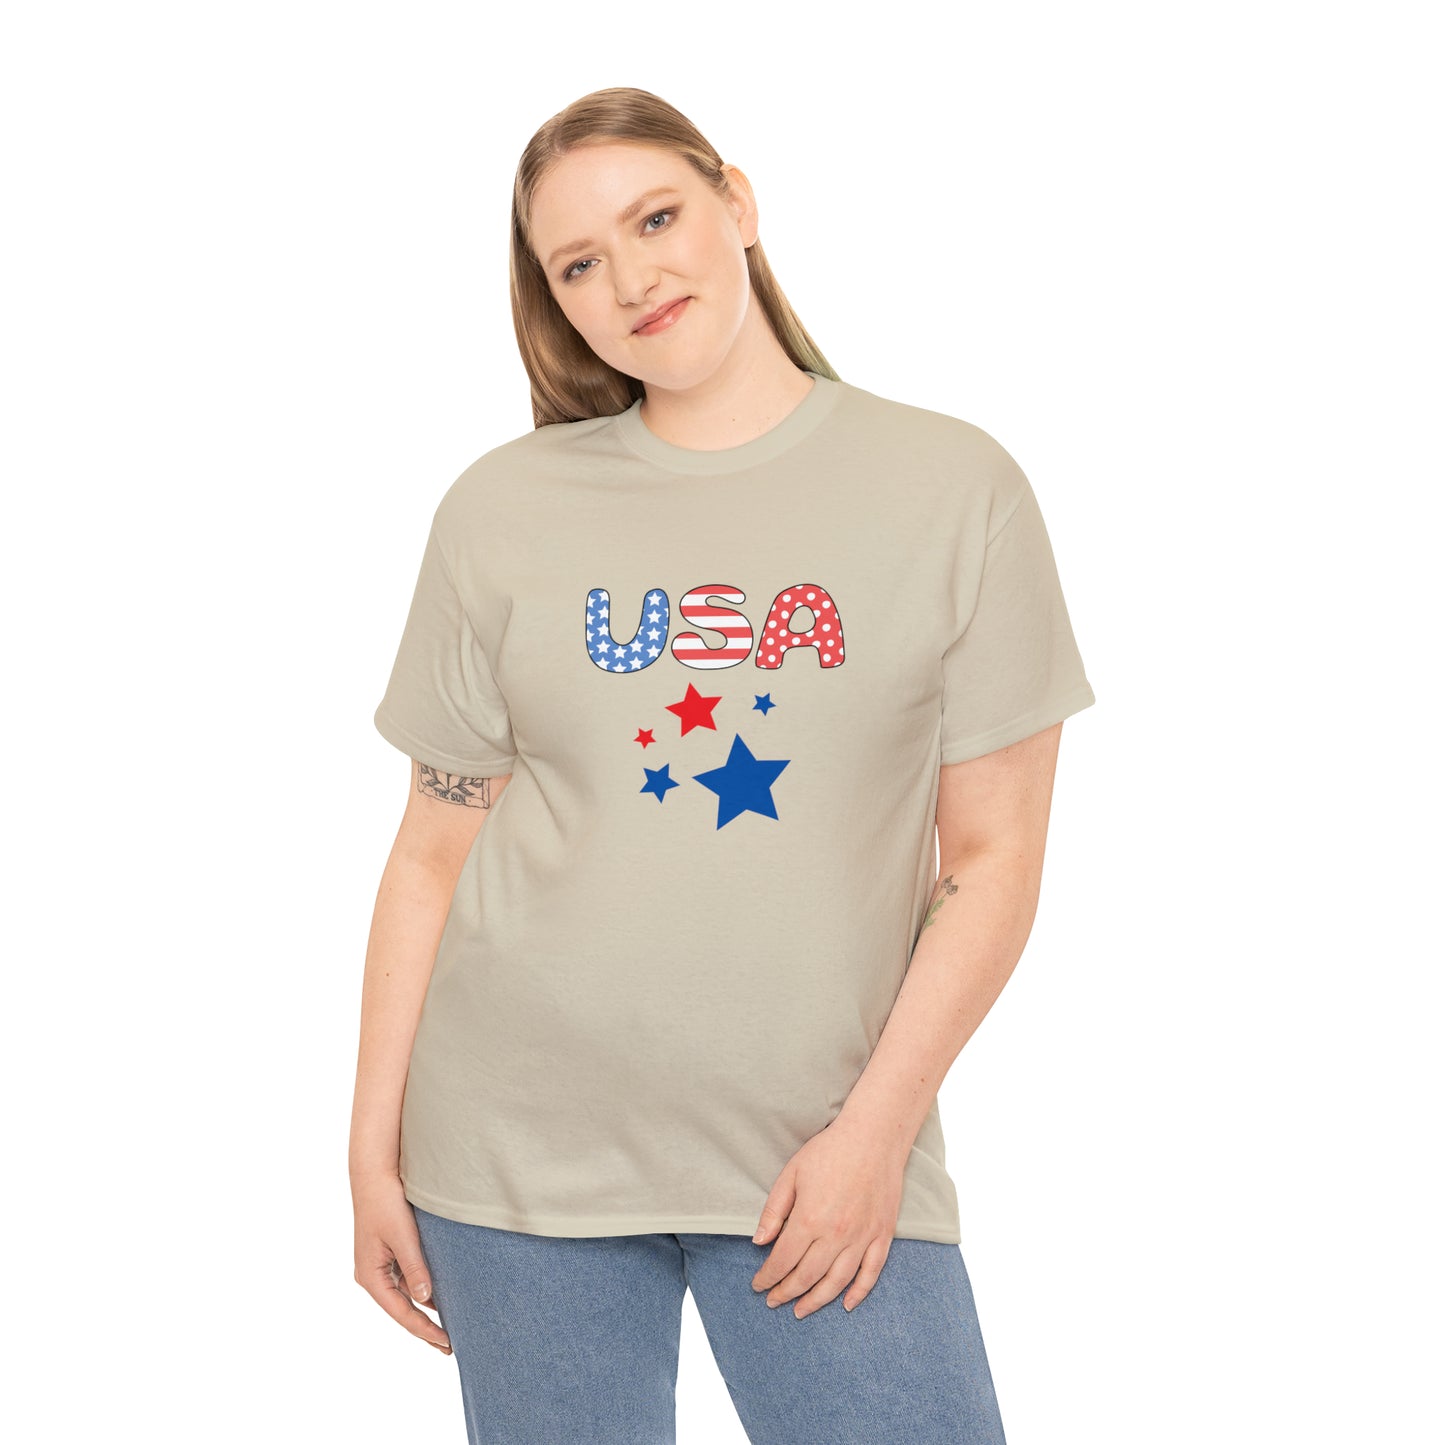 Mock up of a blond-haired woman wearing the Sand t-shirt